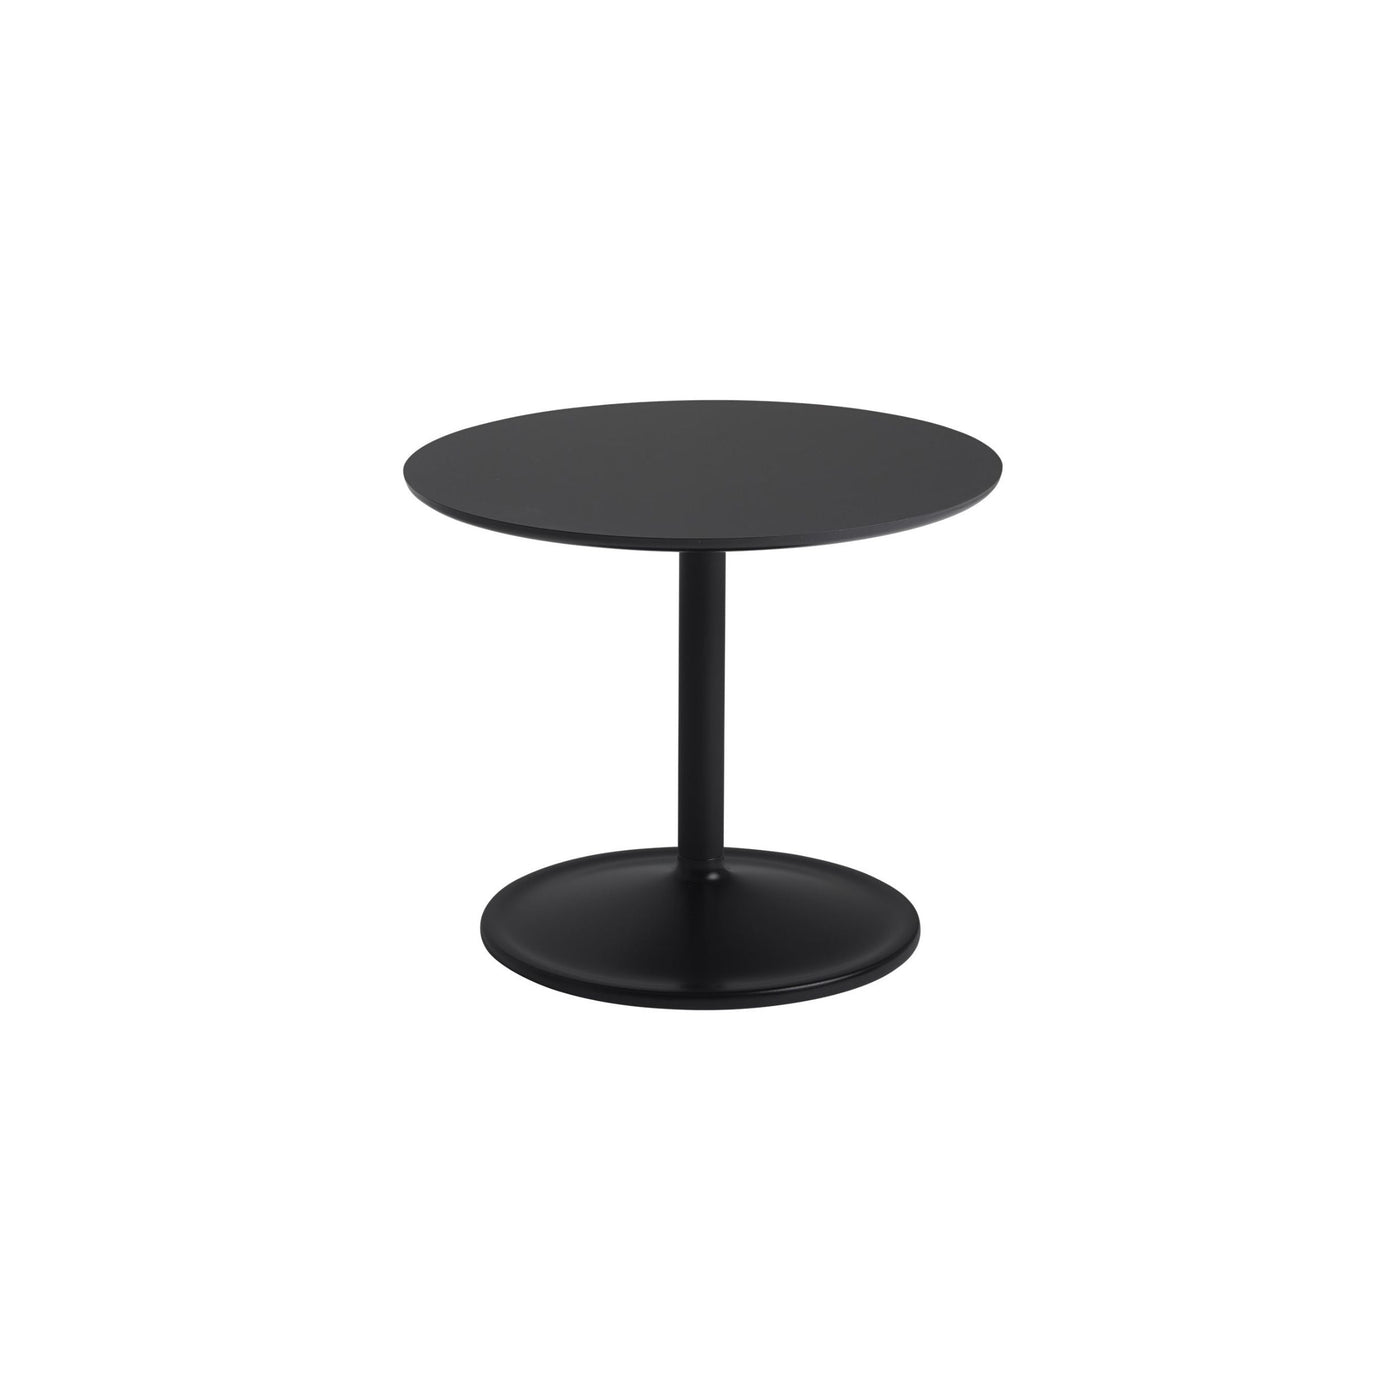 Muuto Soft side table Ø48 x 40cm high. Shop online at someday designs. #colour_black